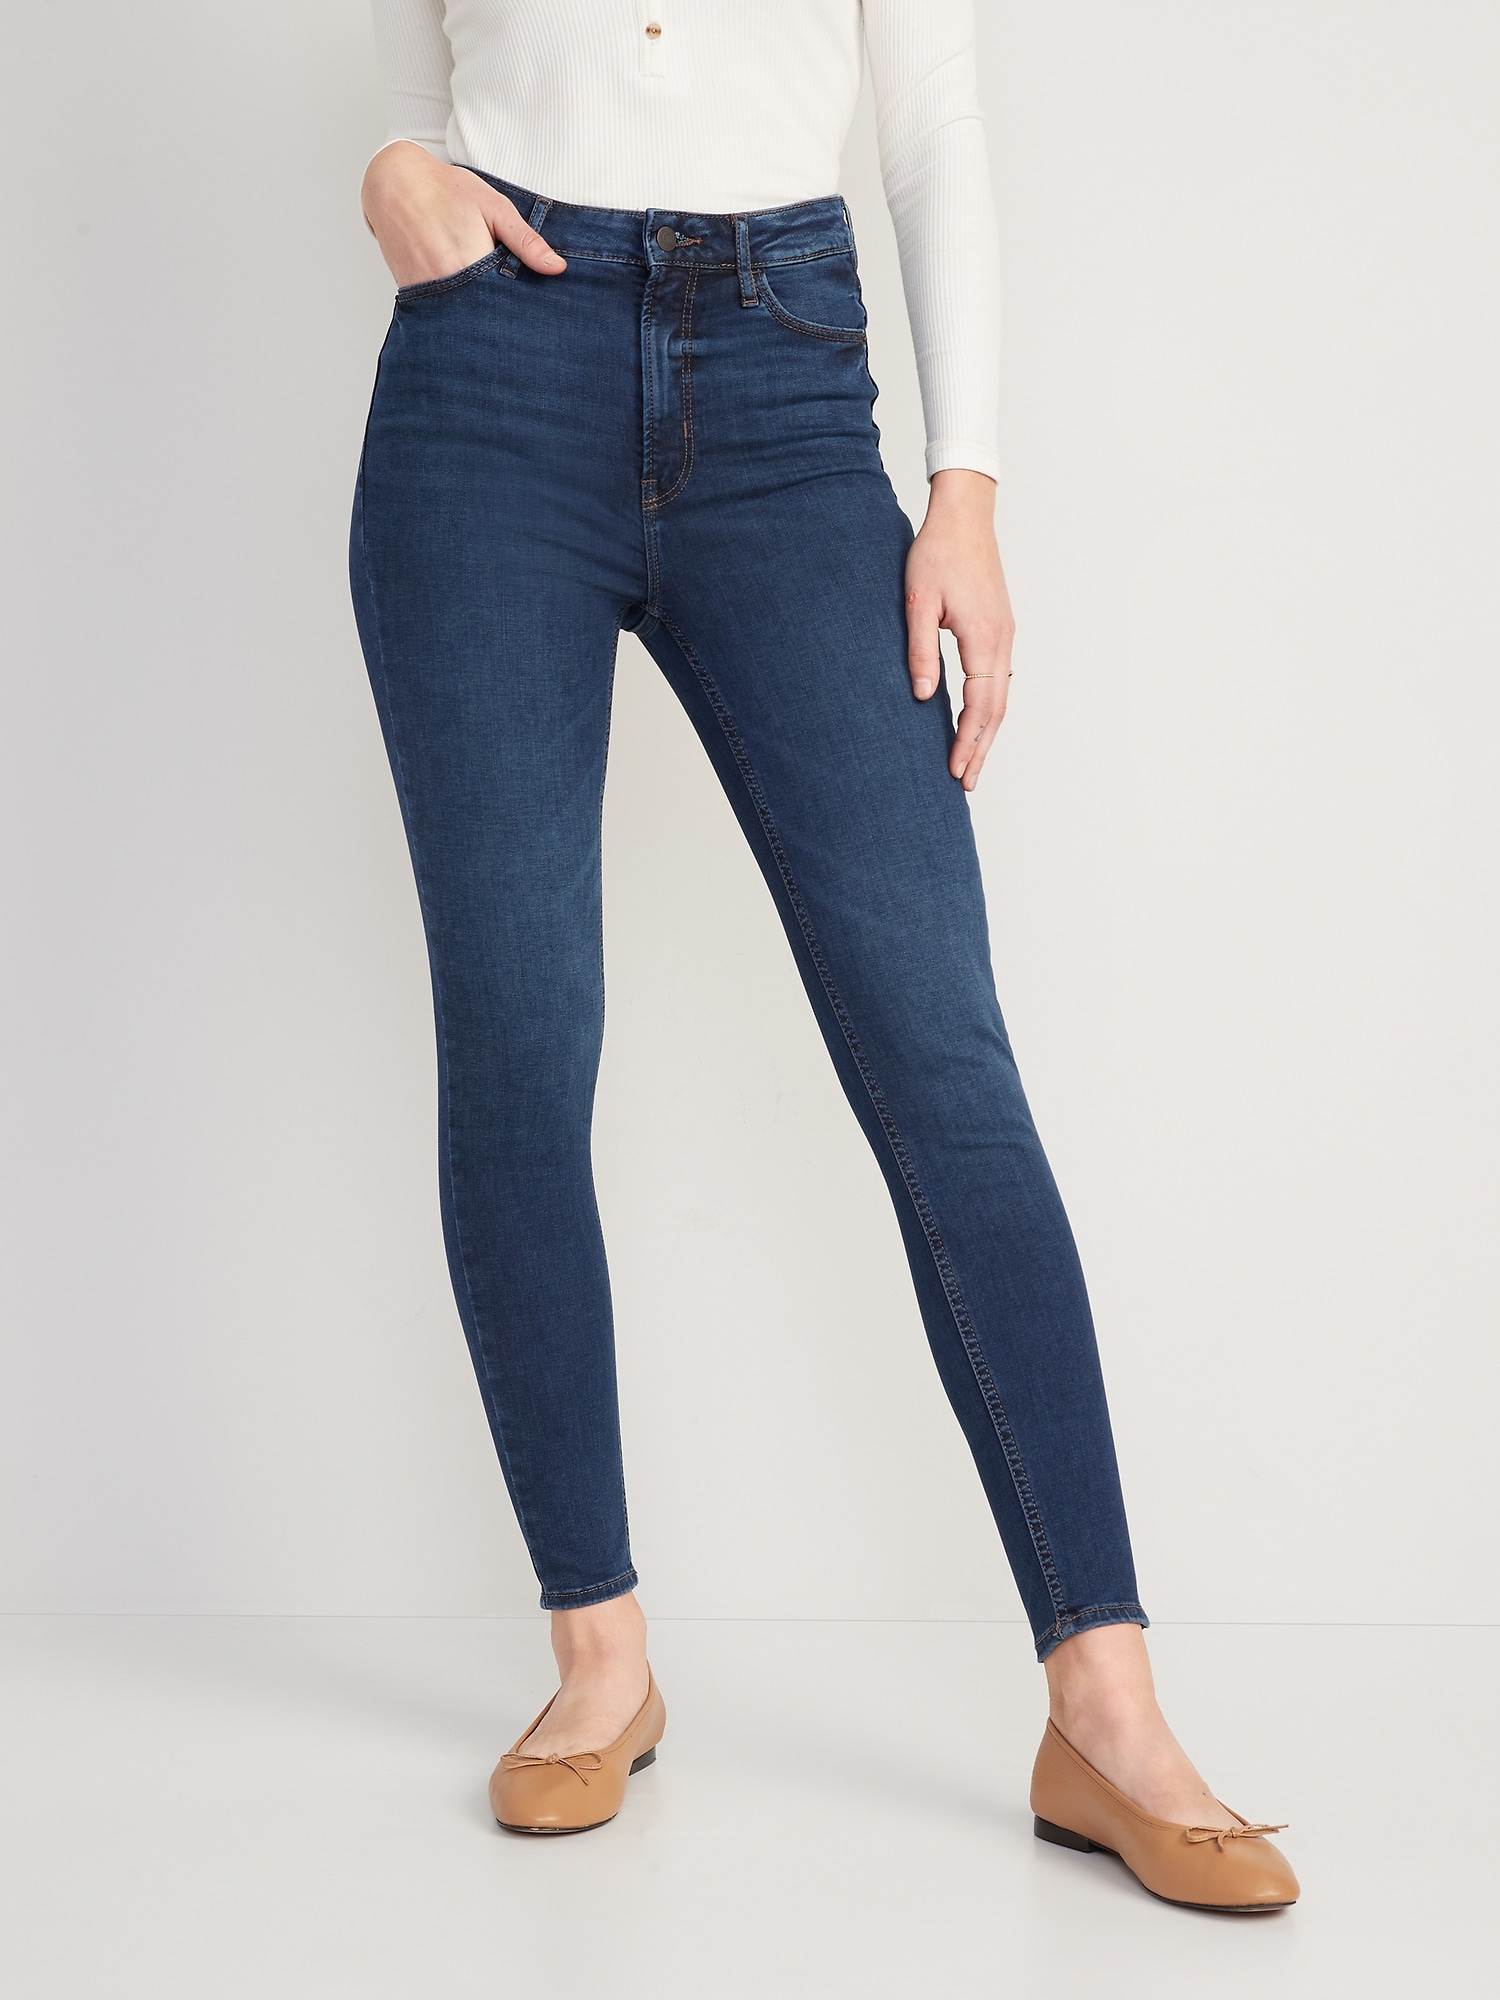 China kader cabine FitsYou 3-Sizes-in-1 Extra High-Waisted Rockstar Super-Skinny Jeans for  Women | Old Navy